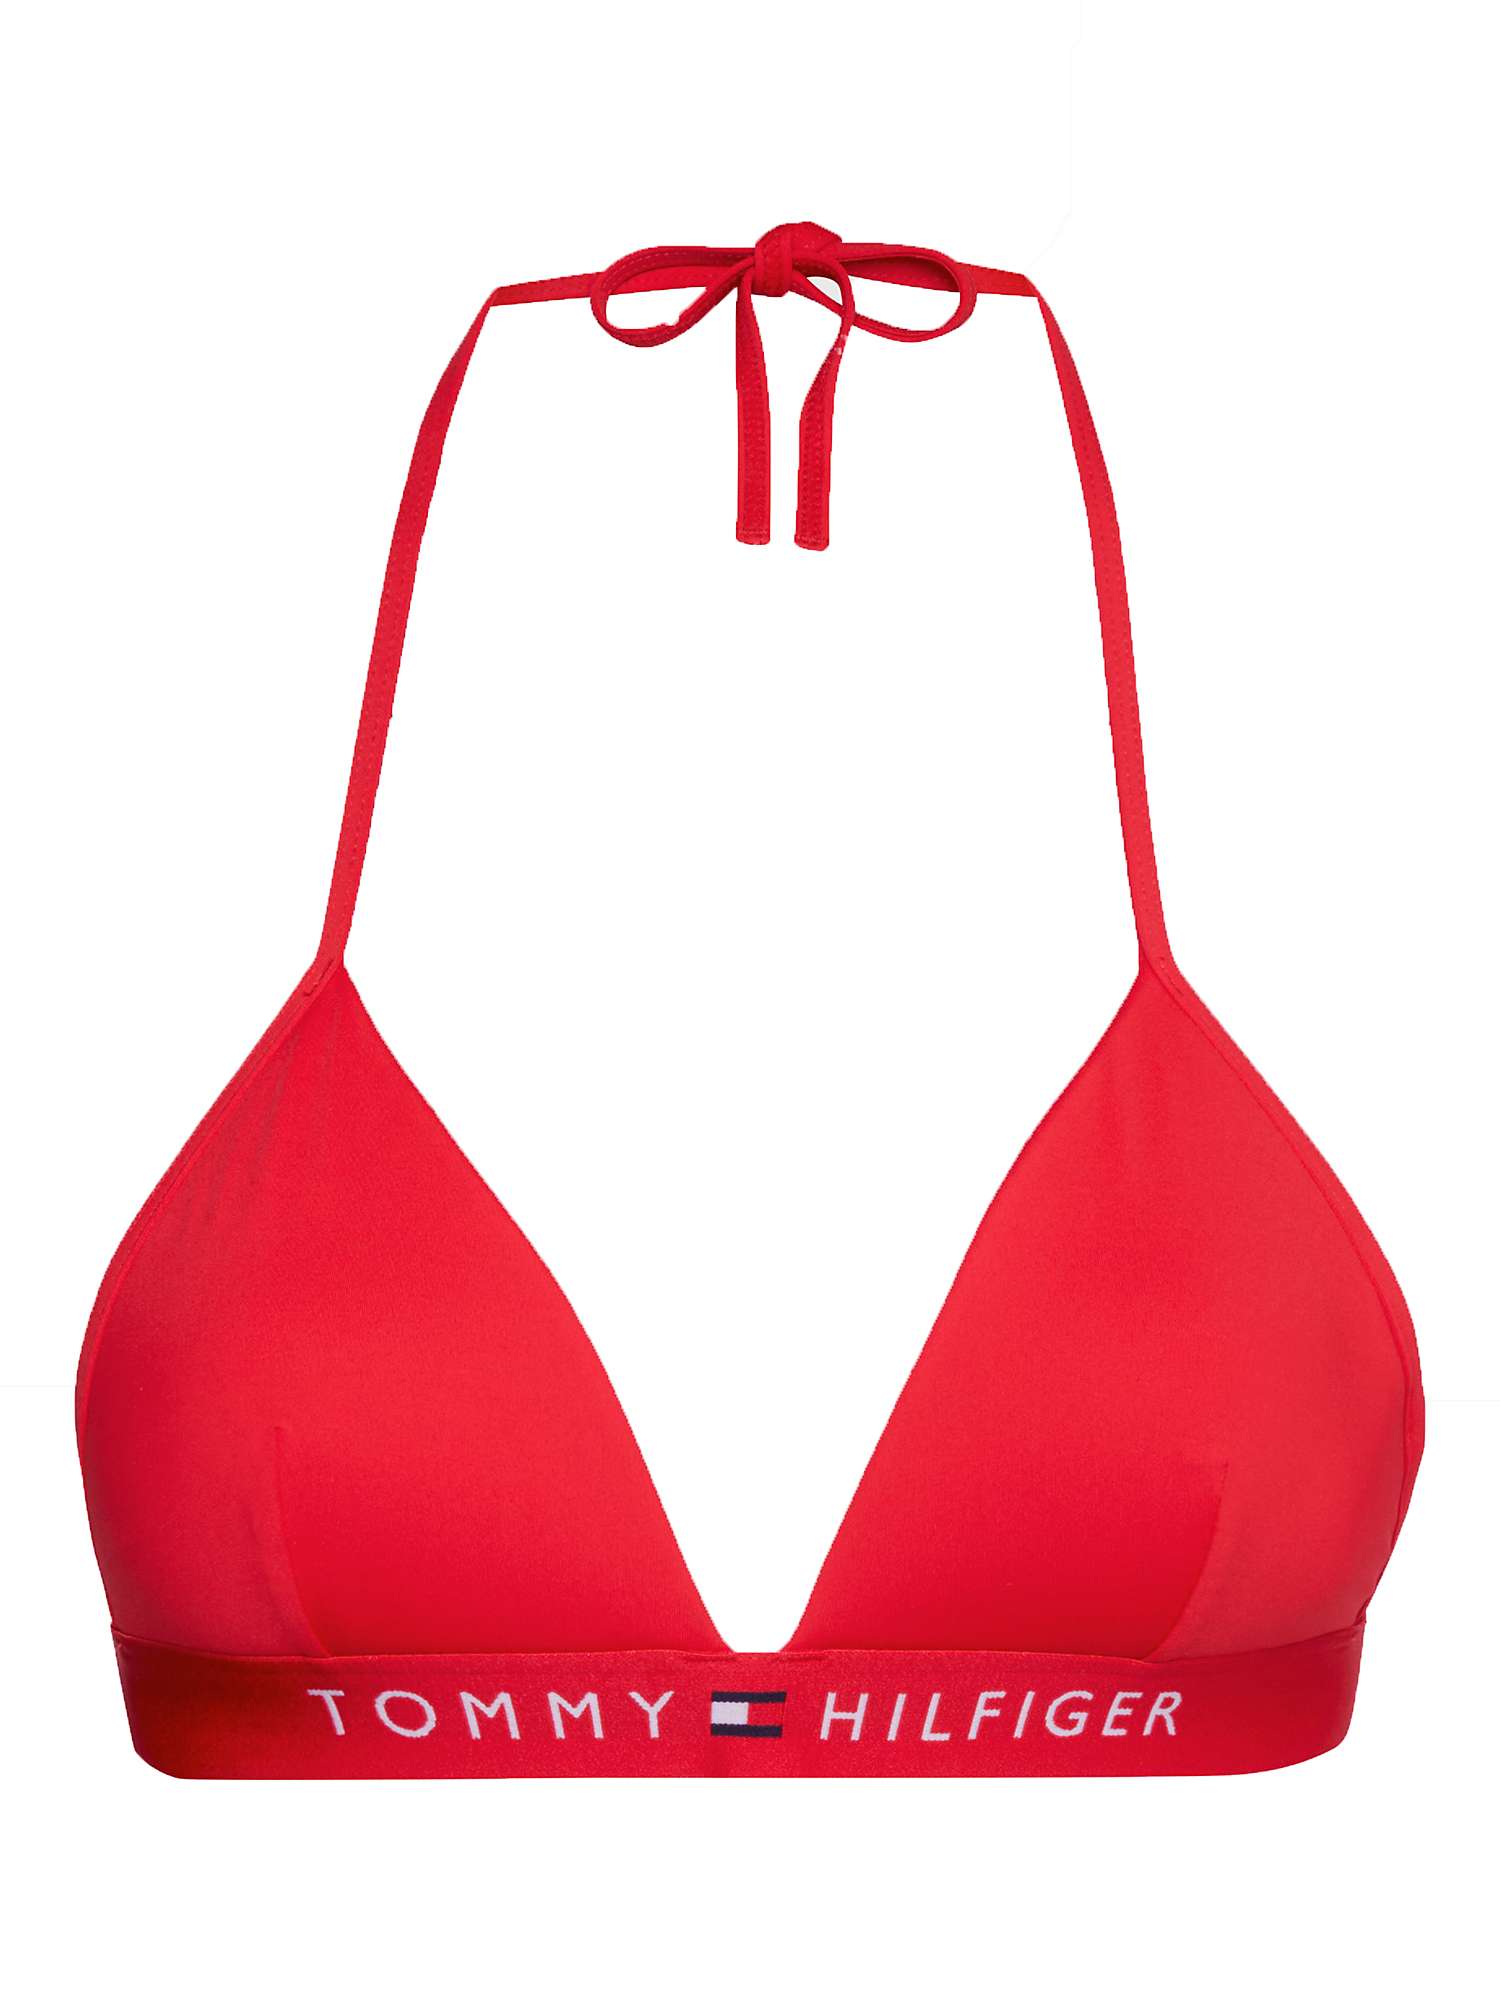 Buy Tommy Hilfiger Fixed Foam Triangle Bikini Top, Primary Red Online at johnlewis.com